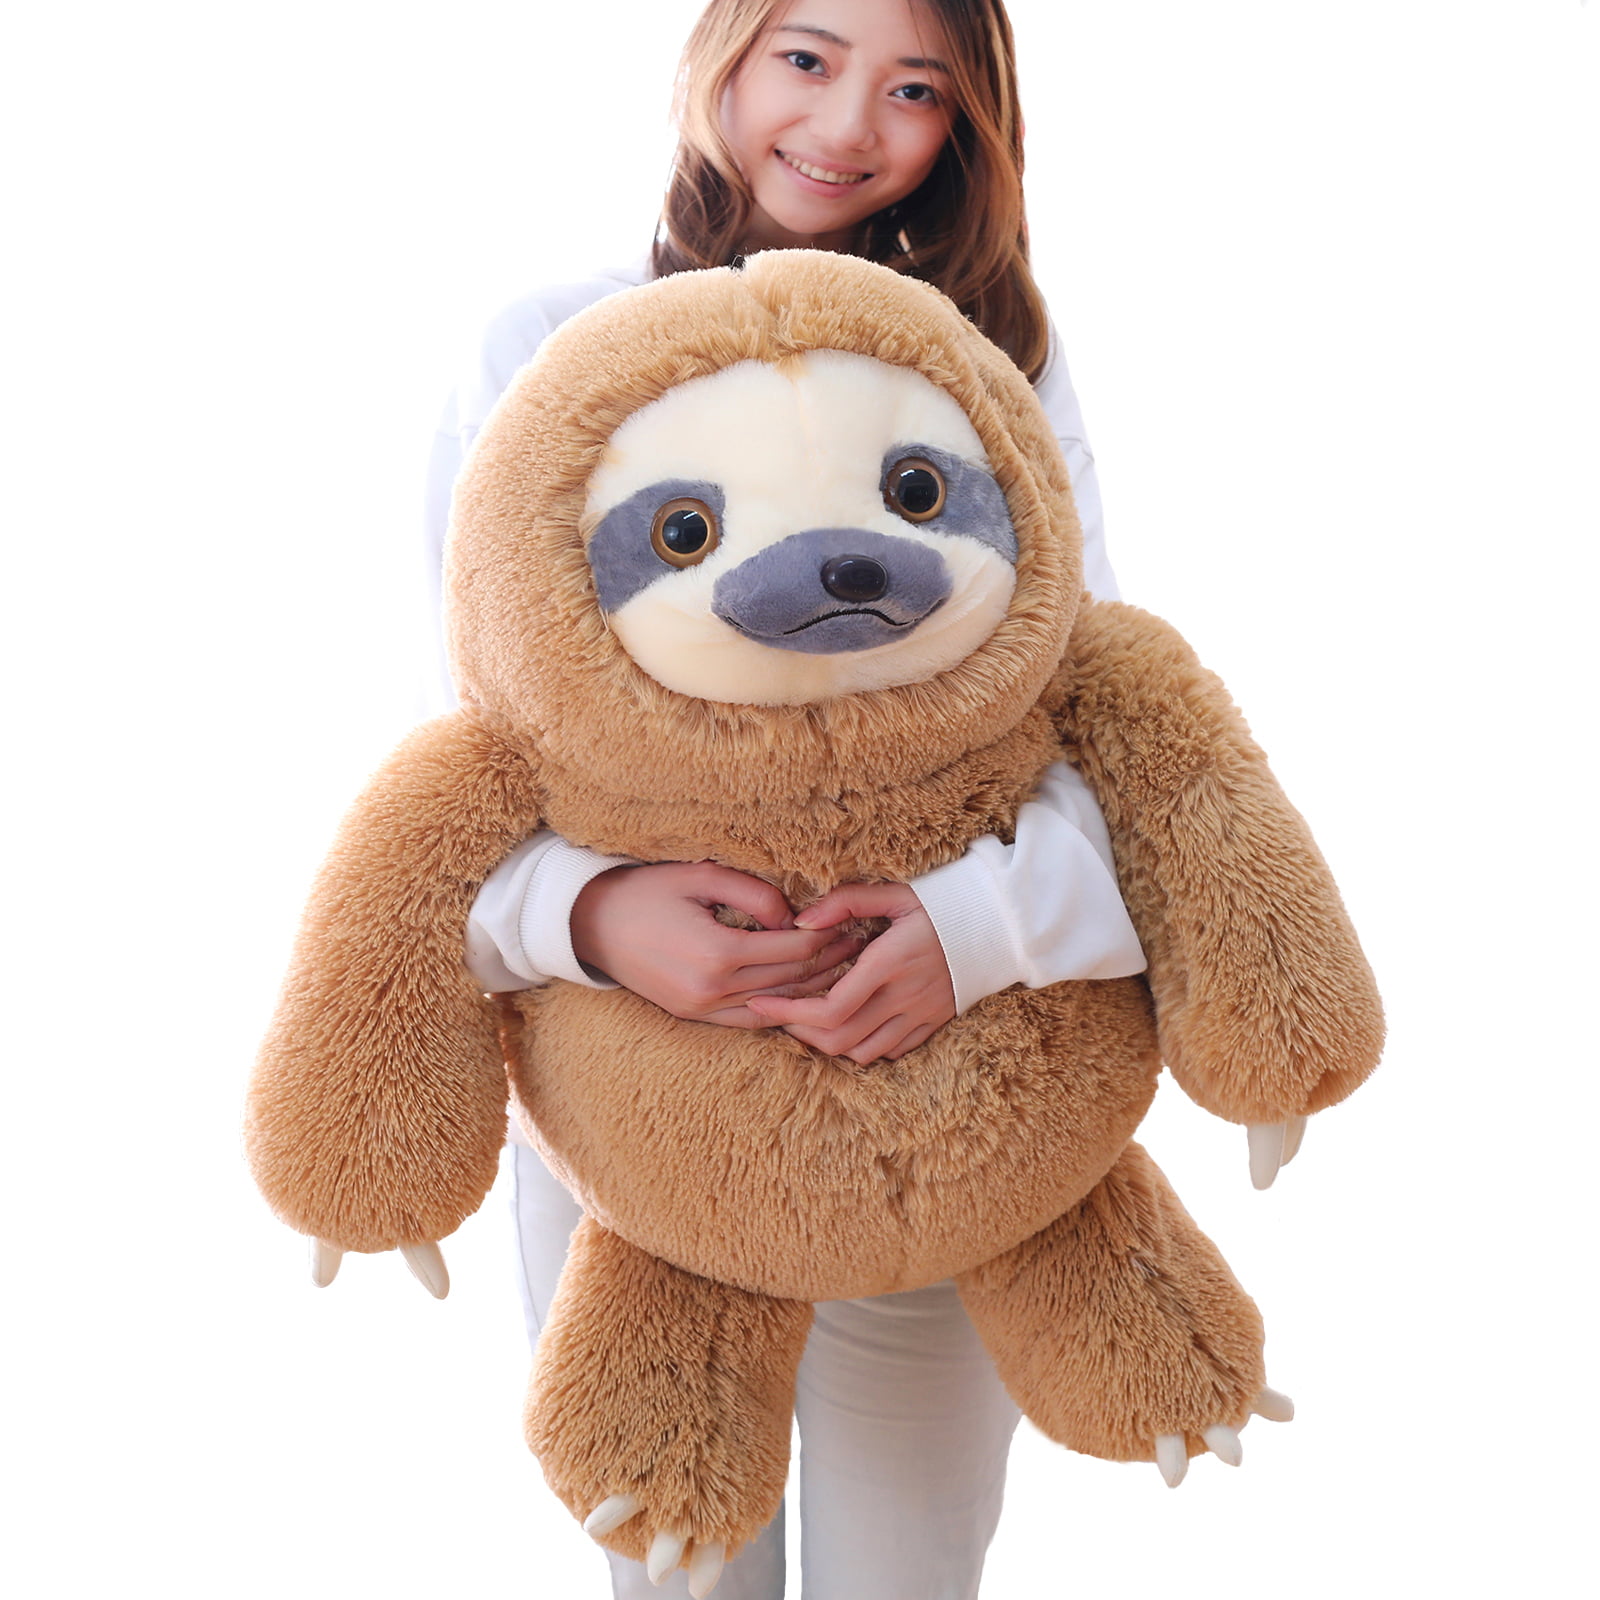 White Winsterch Giant Sloth Stuffed Animal Toy Kids Plush Sloth 27.5 inches 